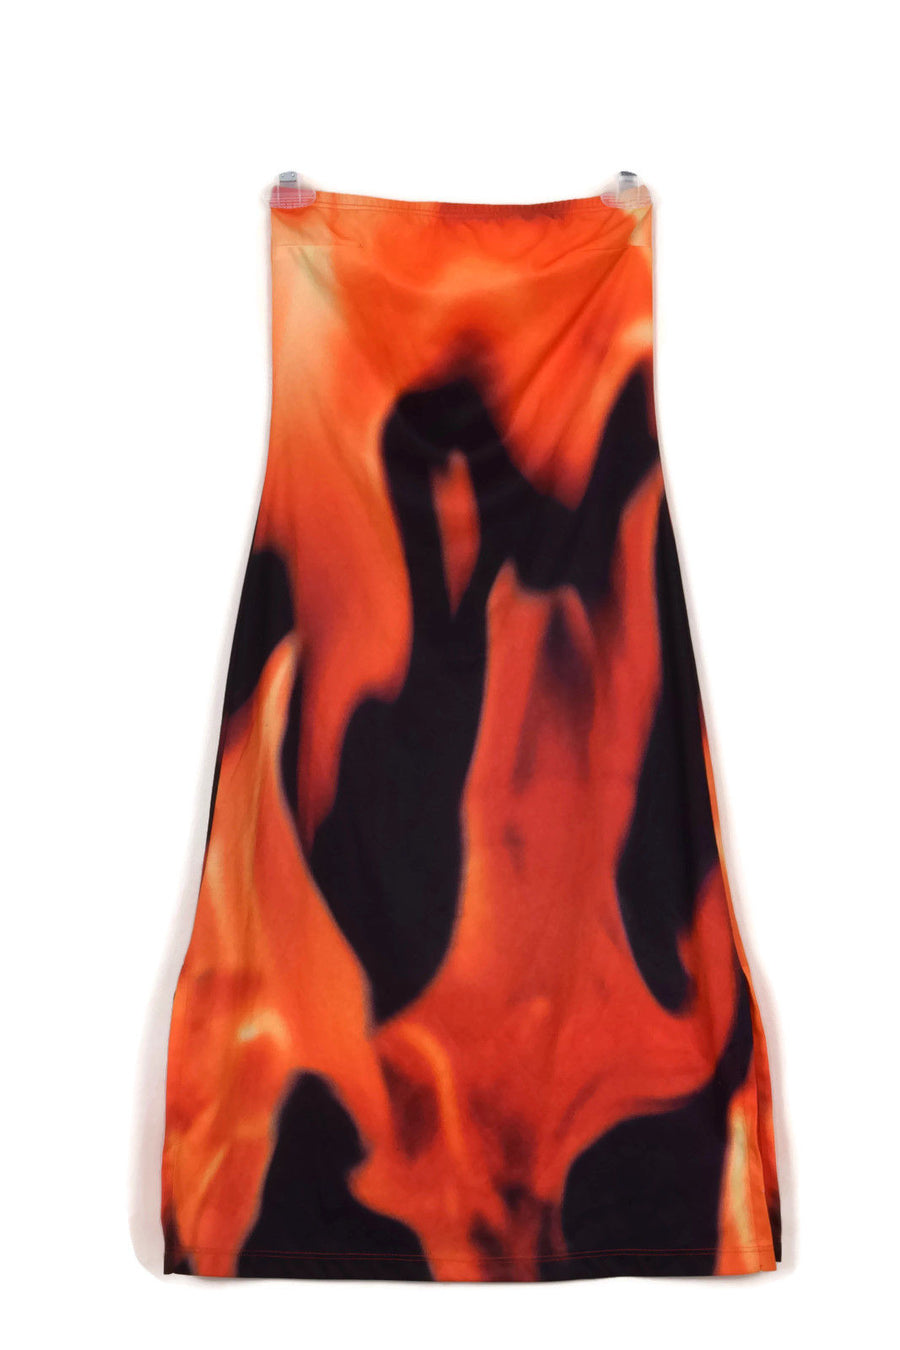 1994 TODD OLDHAM flame dress